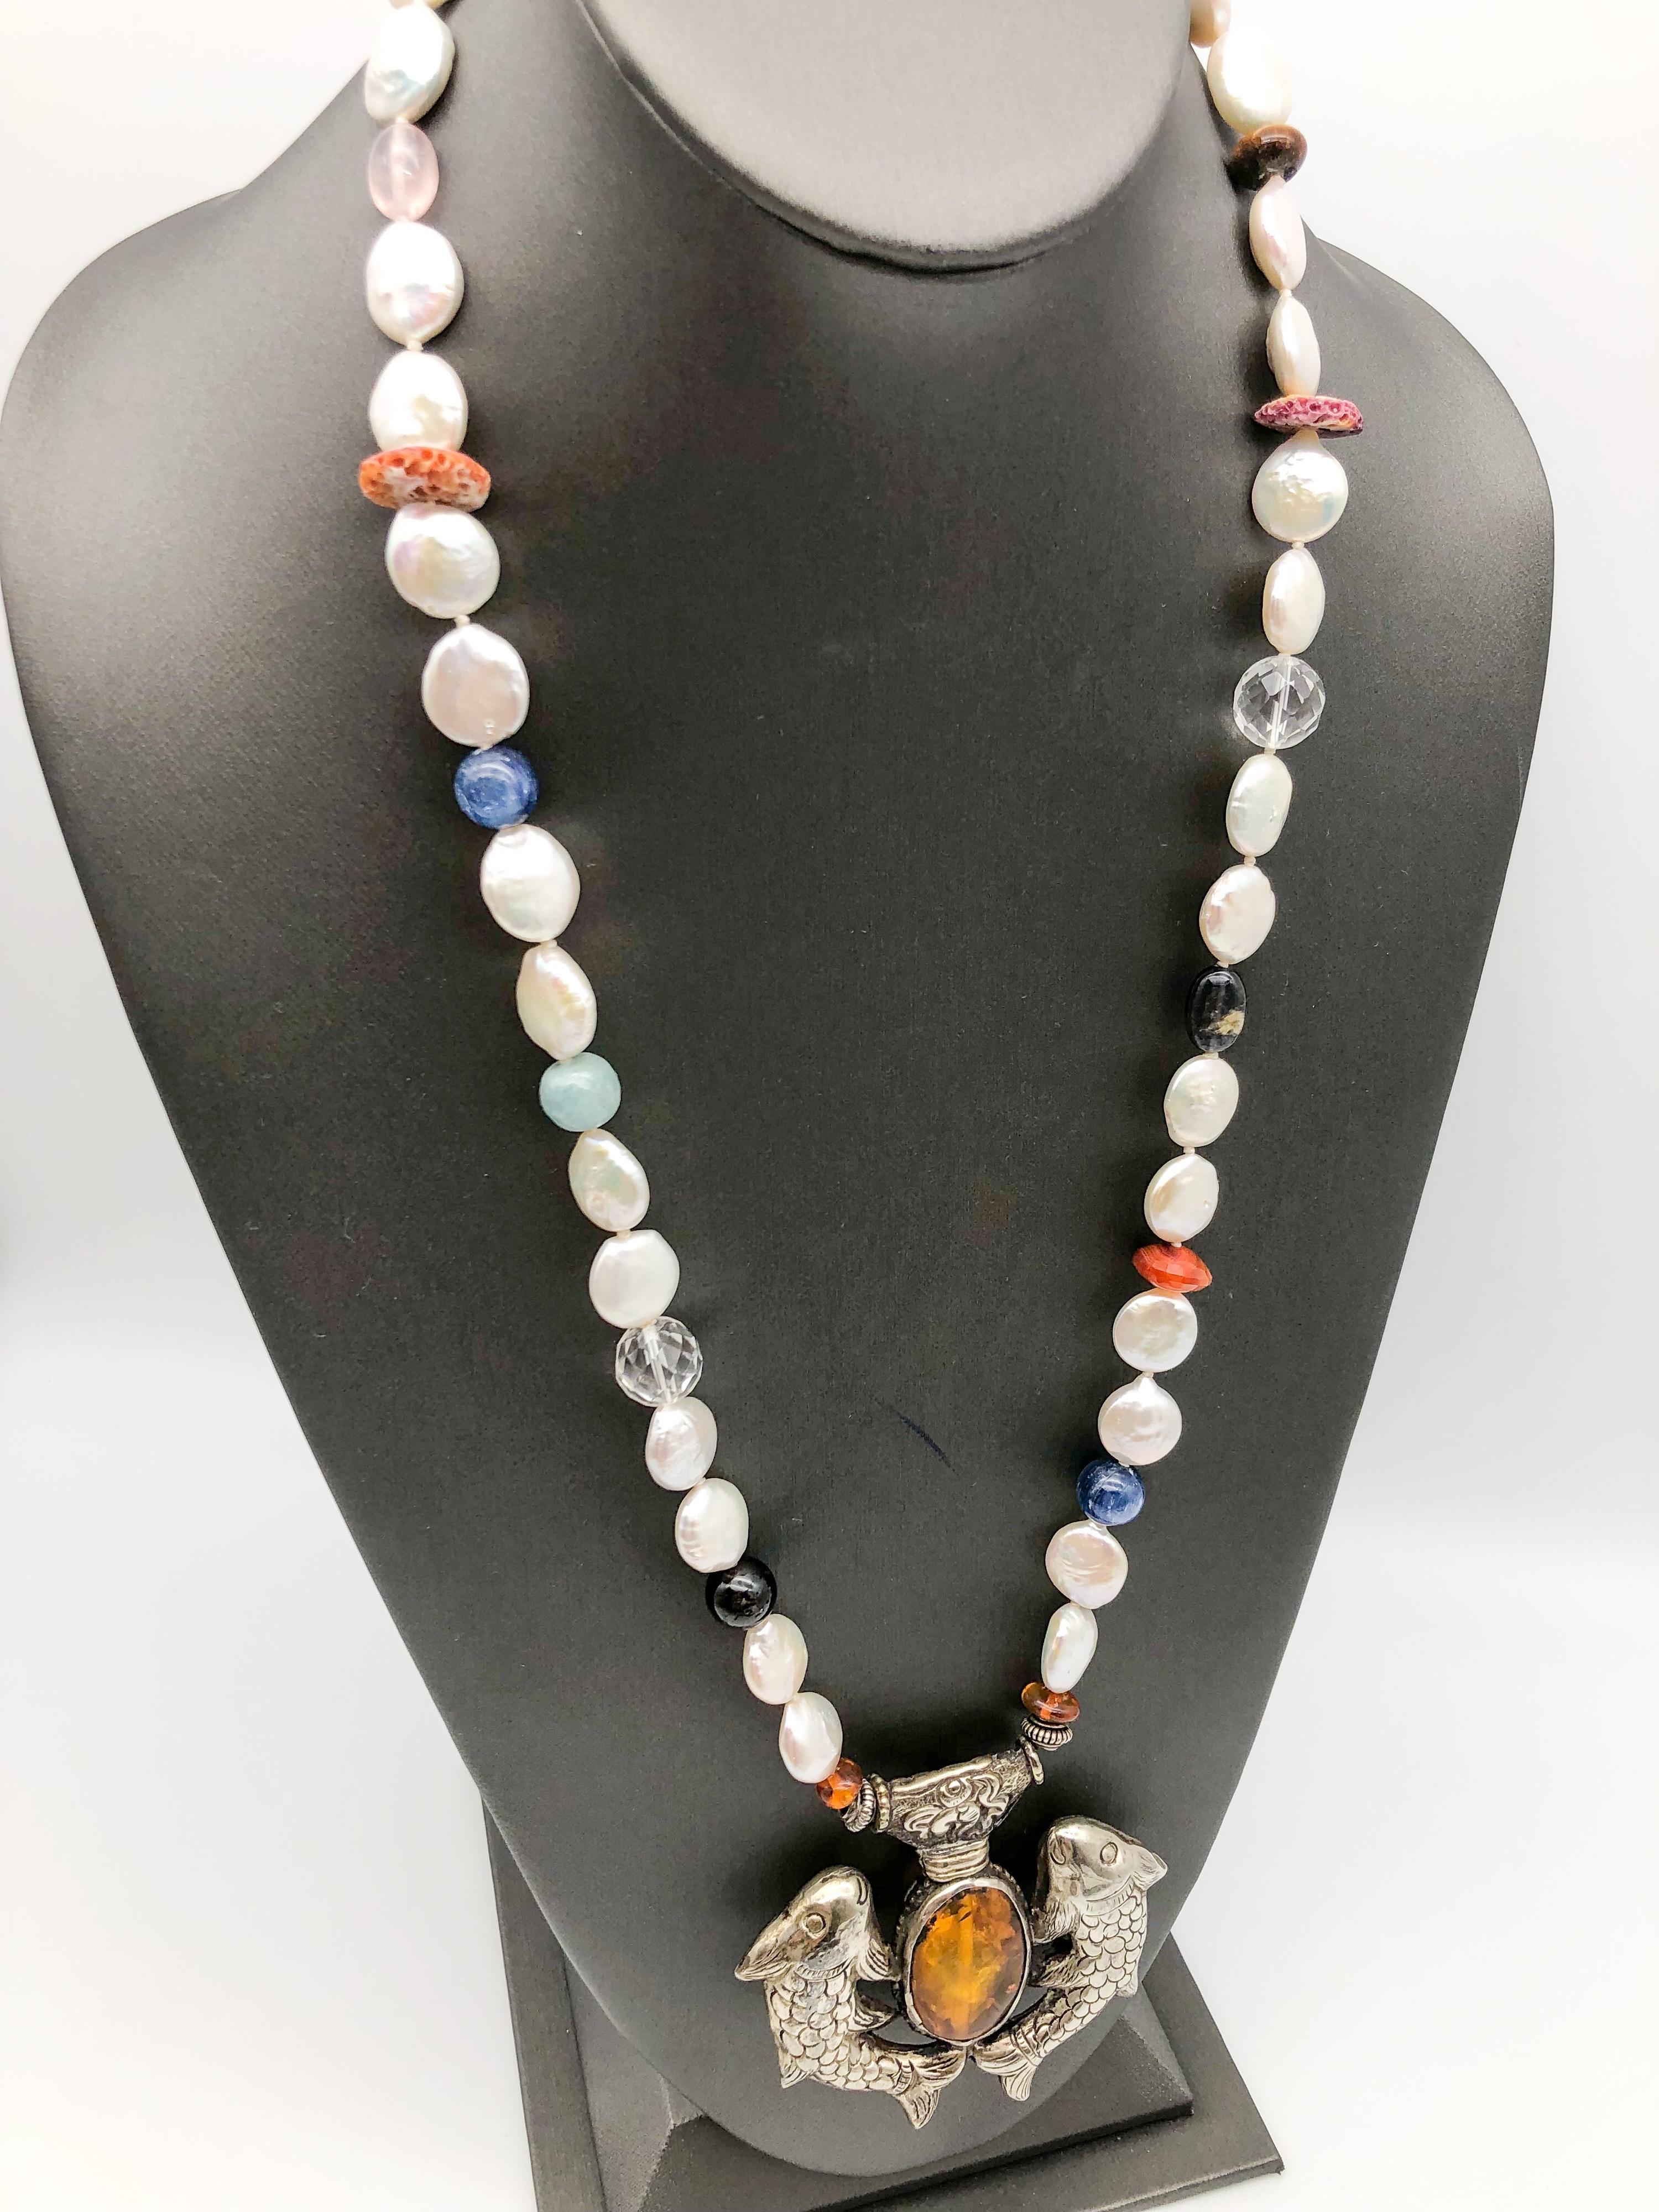 One-of-a-Kind
Sparkling Freshwater Pearl long necklace. The Coin Pearls are spaced with assorted 10mm Gemstone beads. 
Featuring Sterling Silver pendant Tibetan Auspicious symbol 